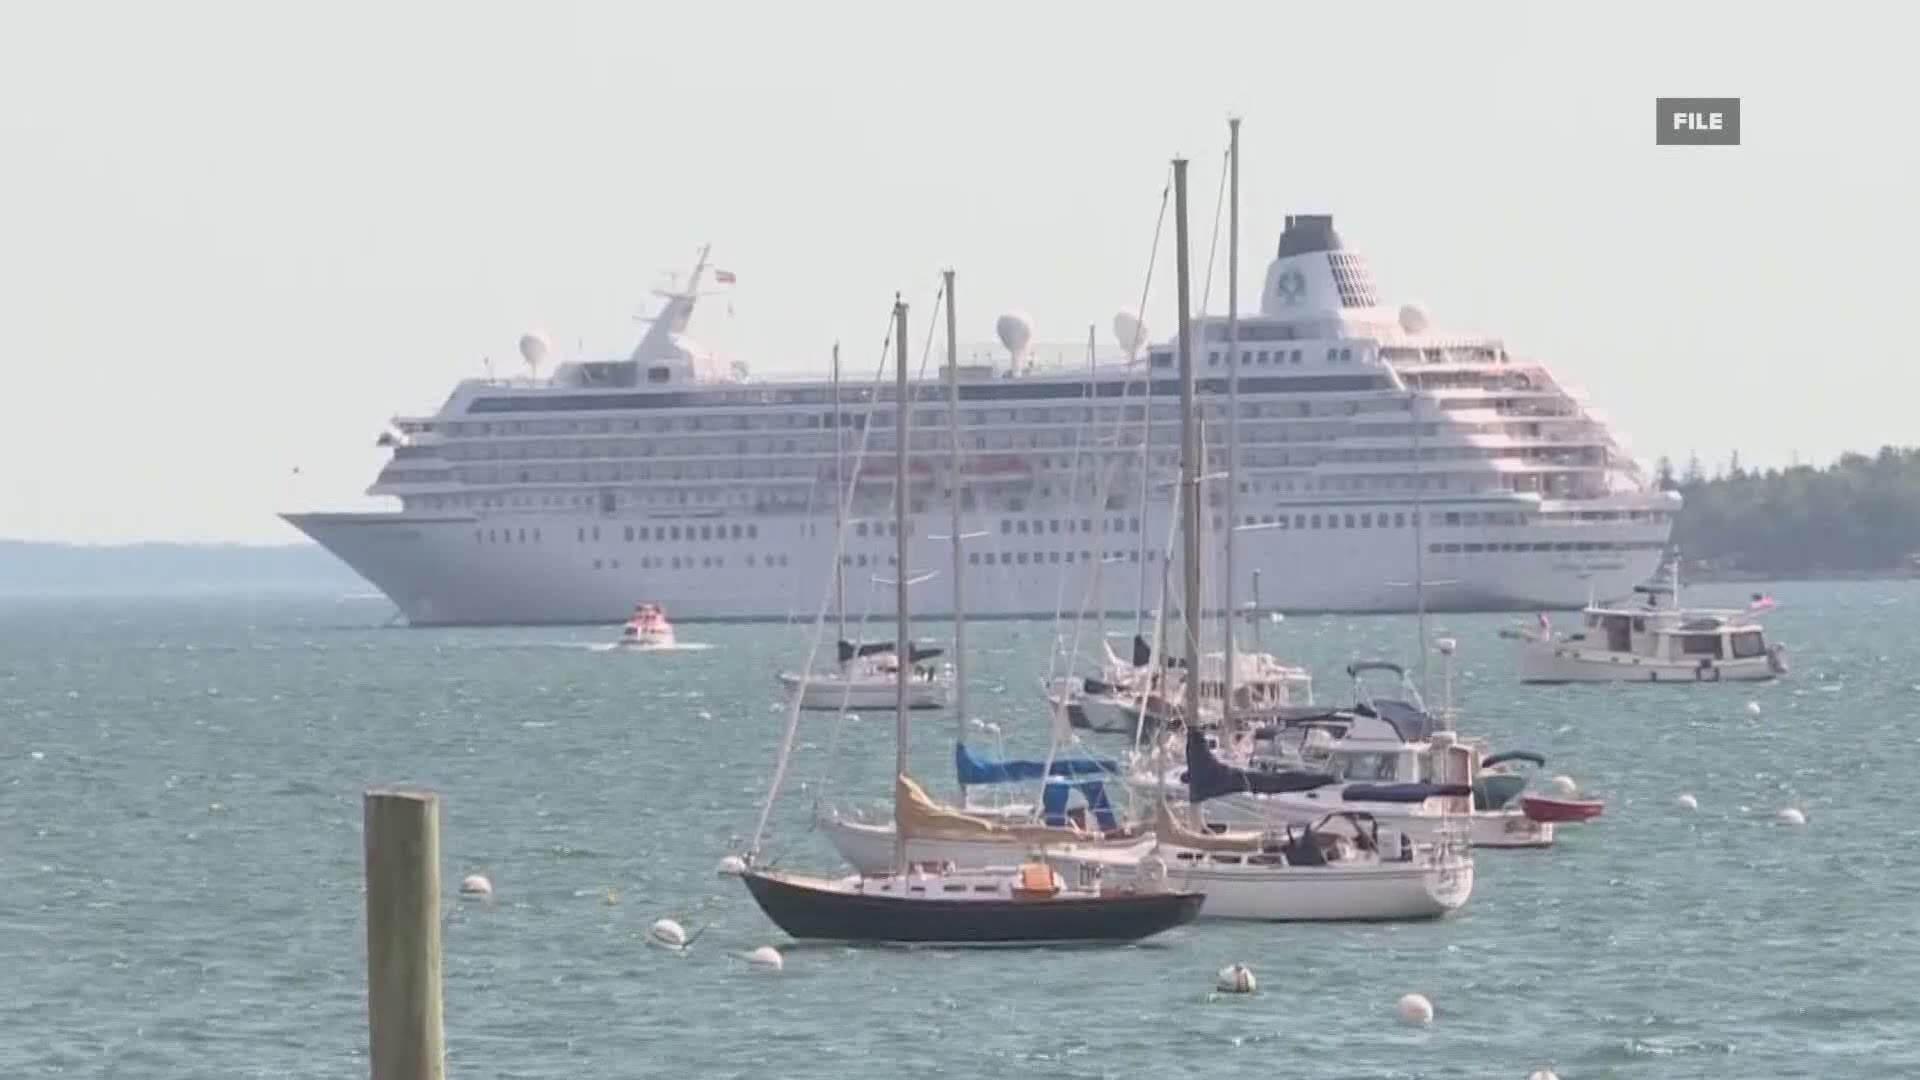 Town councilors plan to meet on Aug. 2, to develop a proposal for specific limits on cruise ships.